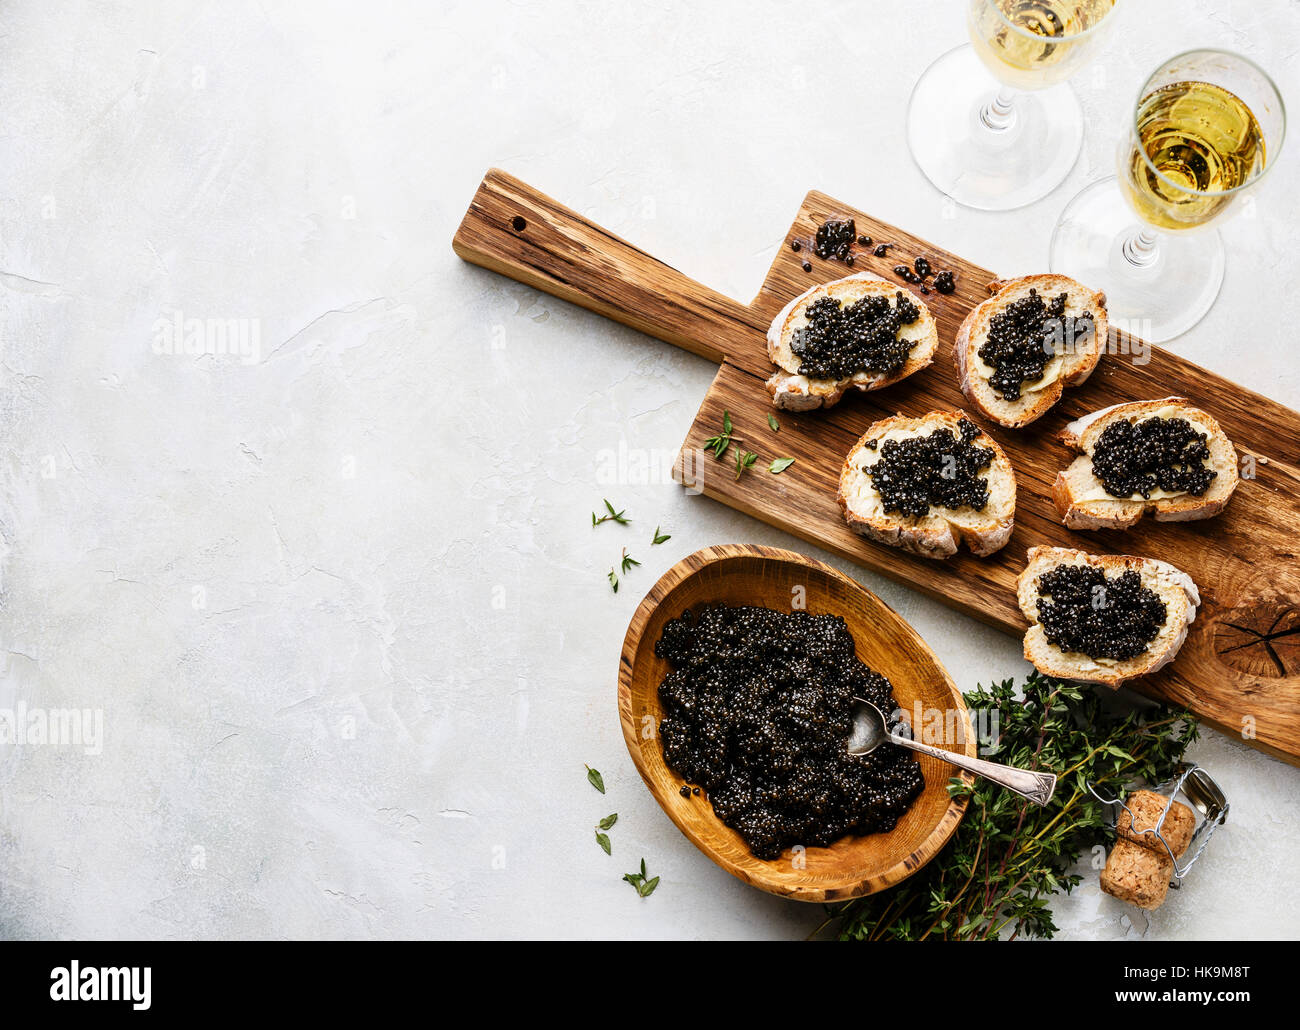 Sturgeon black caviar in wooden bowl, sandwiches and champagne on white background copy space Stock Photo